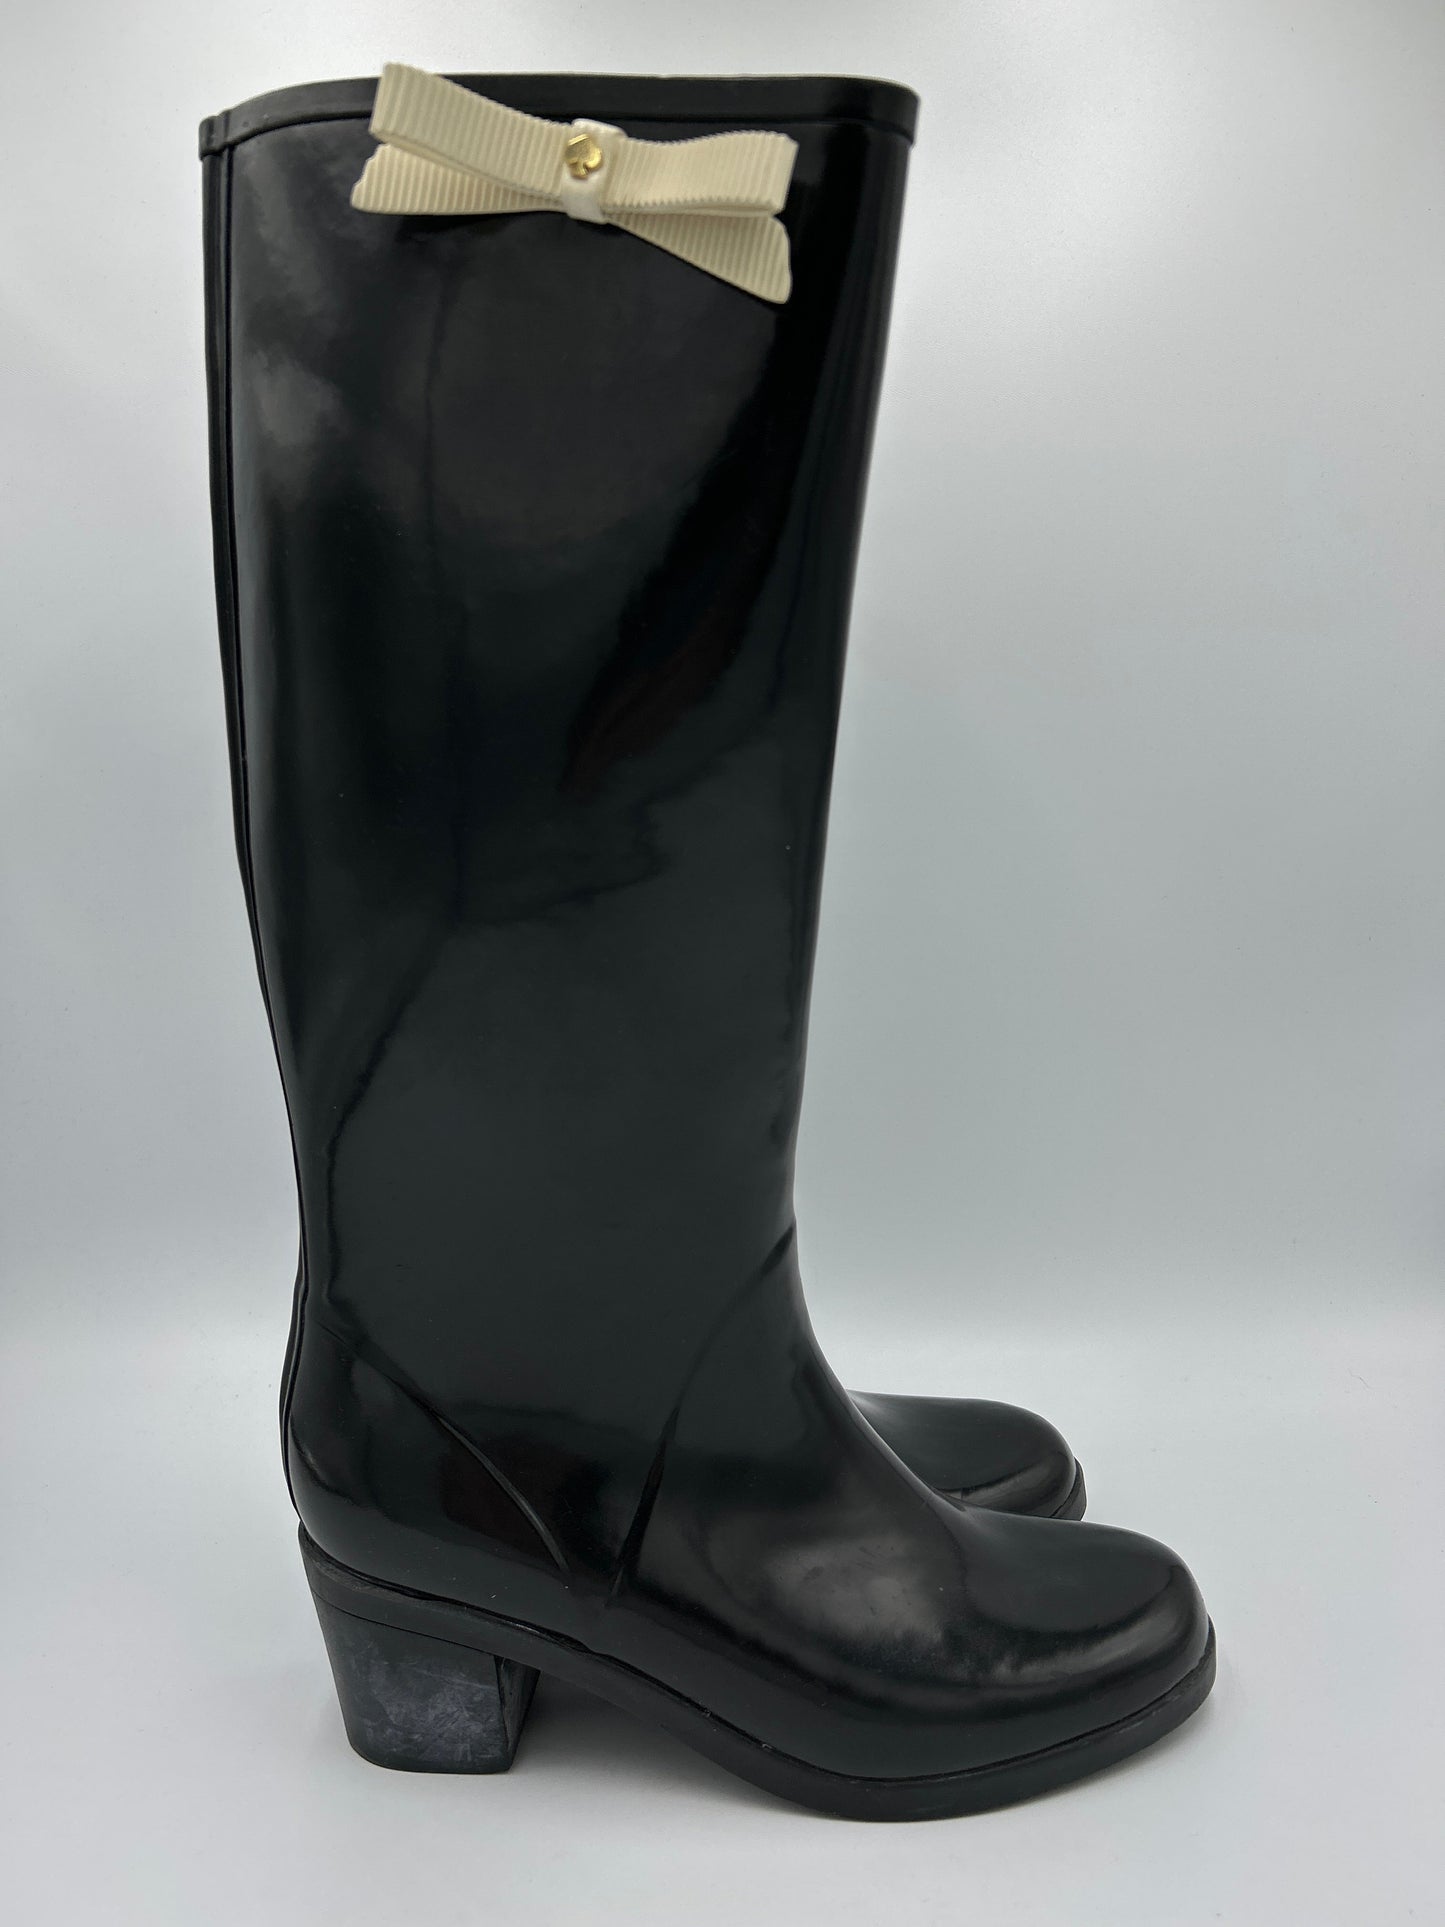 Boots Designer By Kate Spade  Size: 10